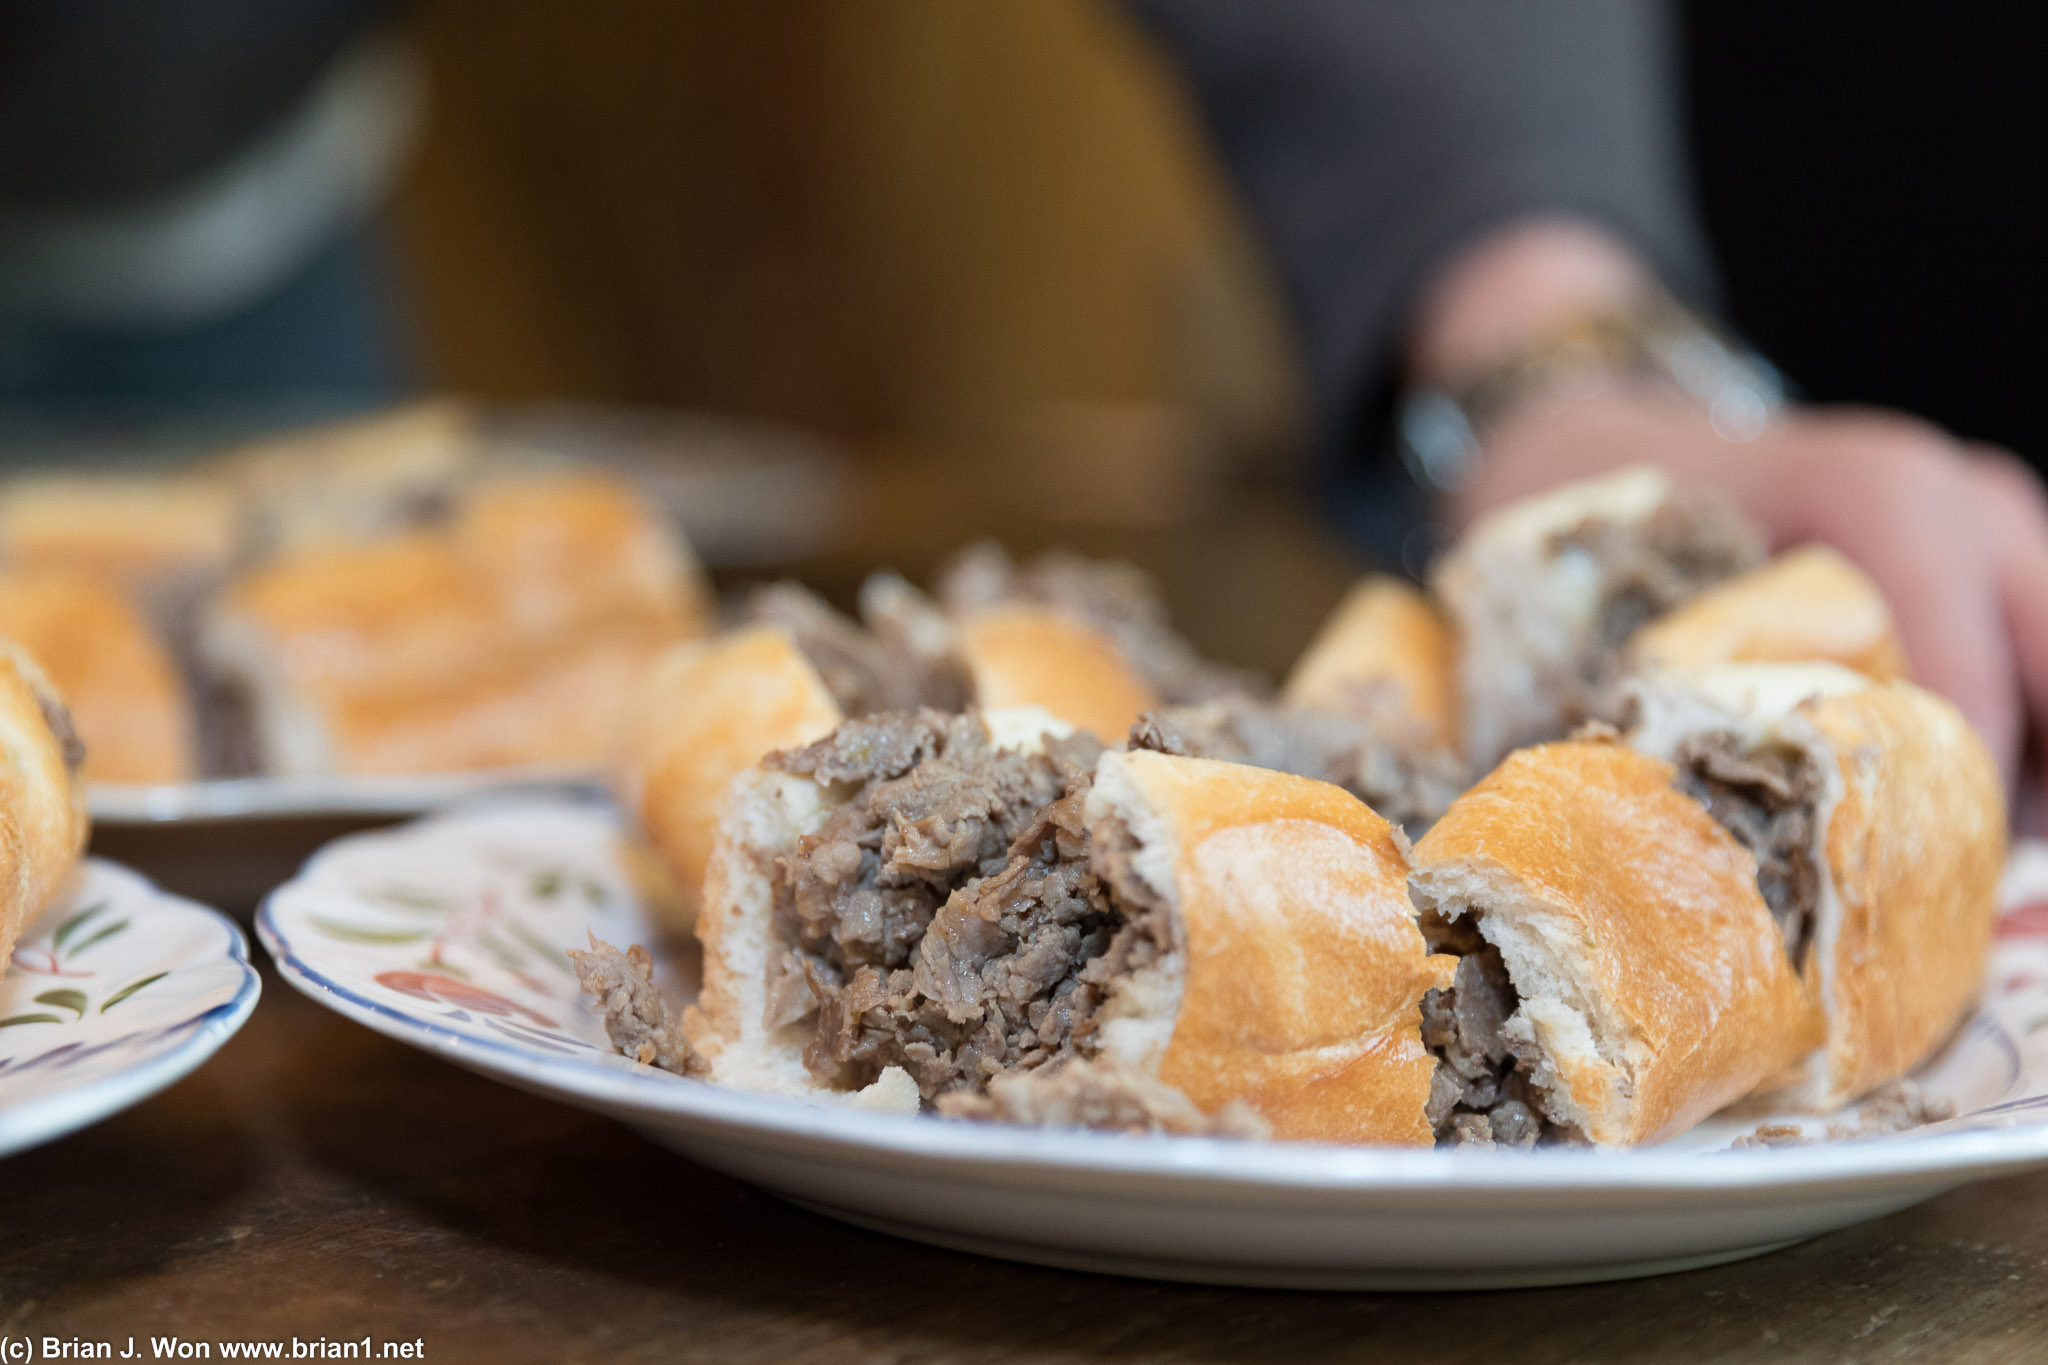 A Philly cheesesteak is definitely better in Philly.